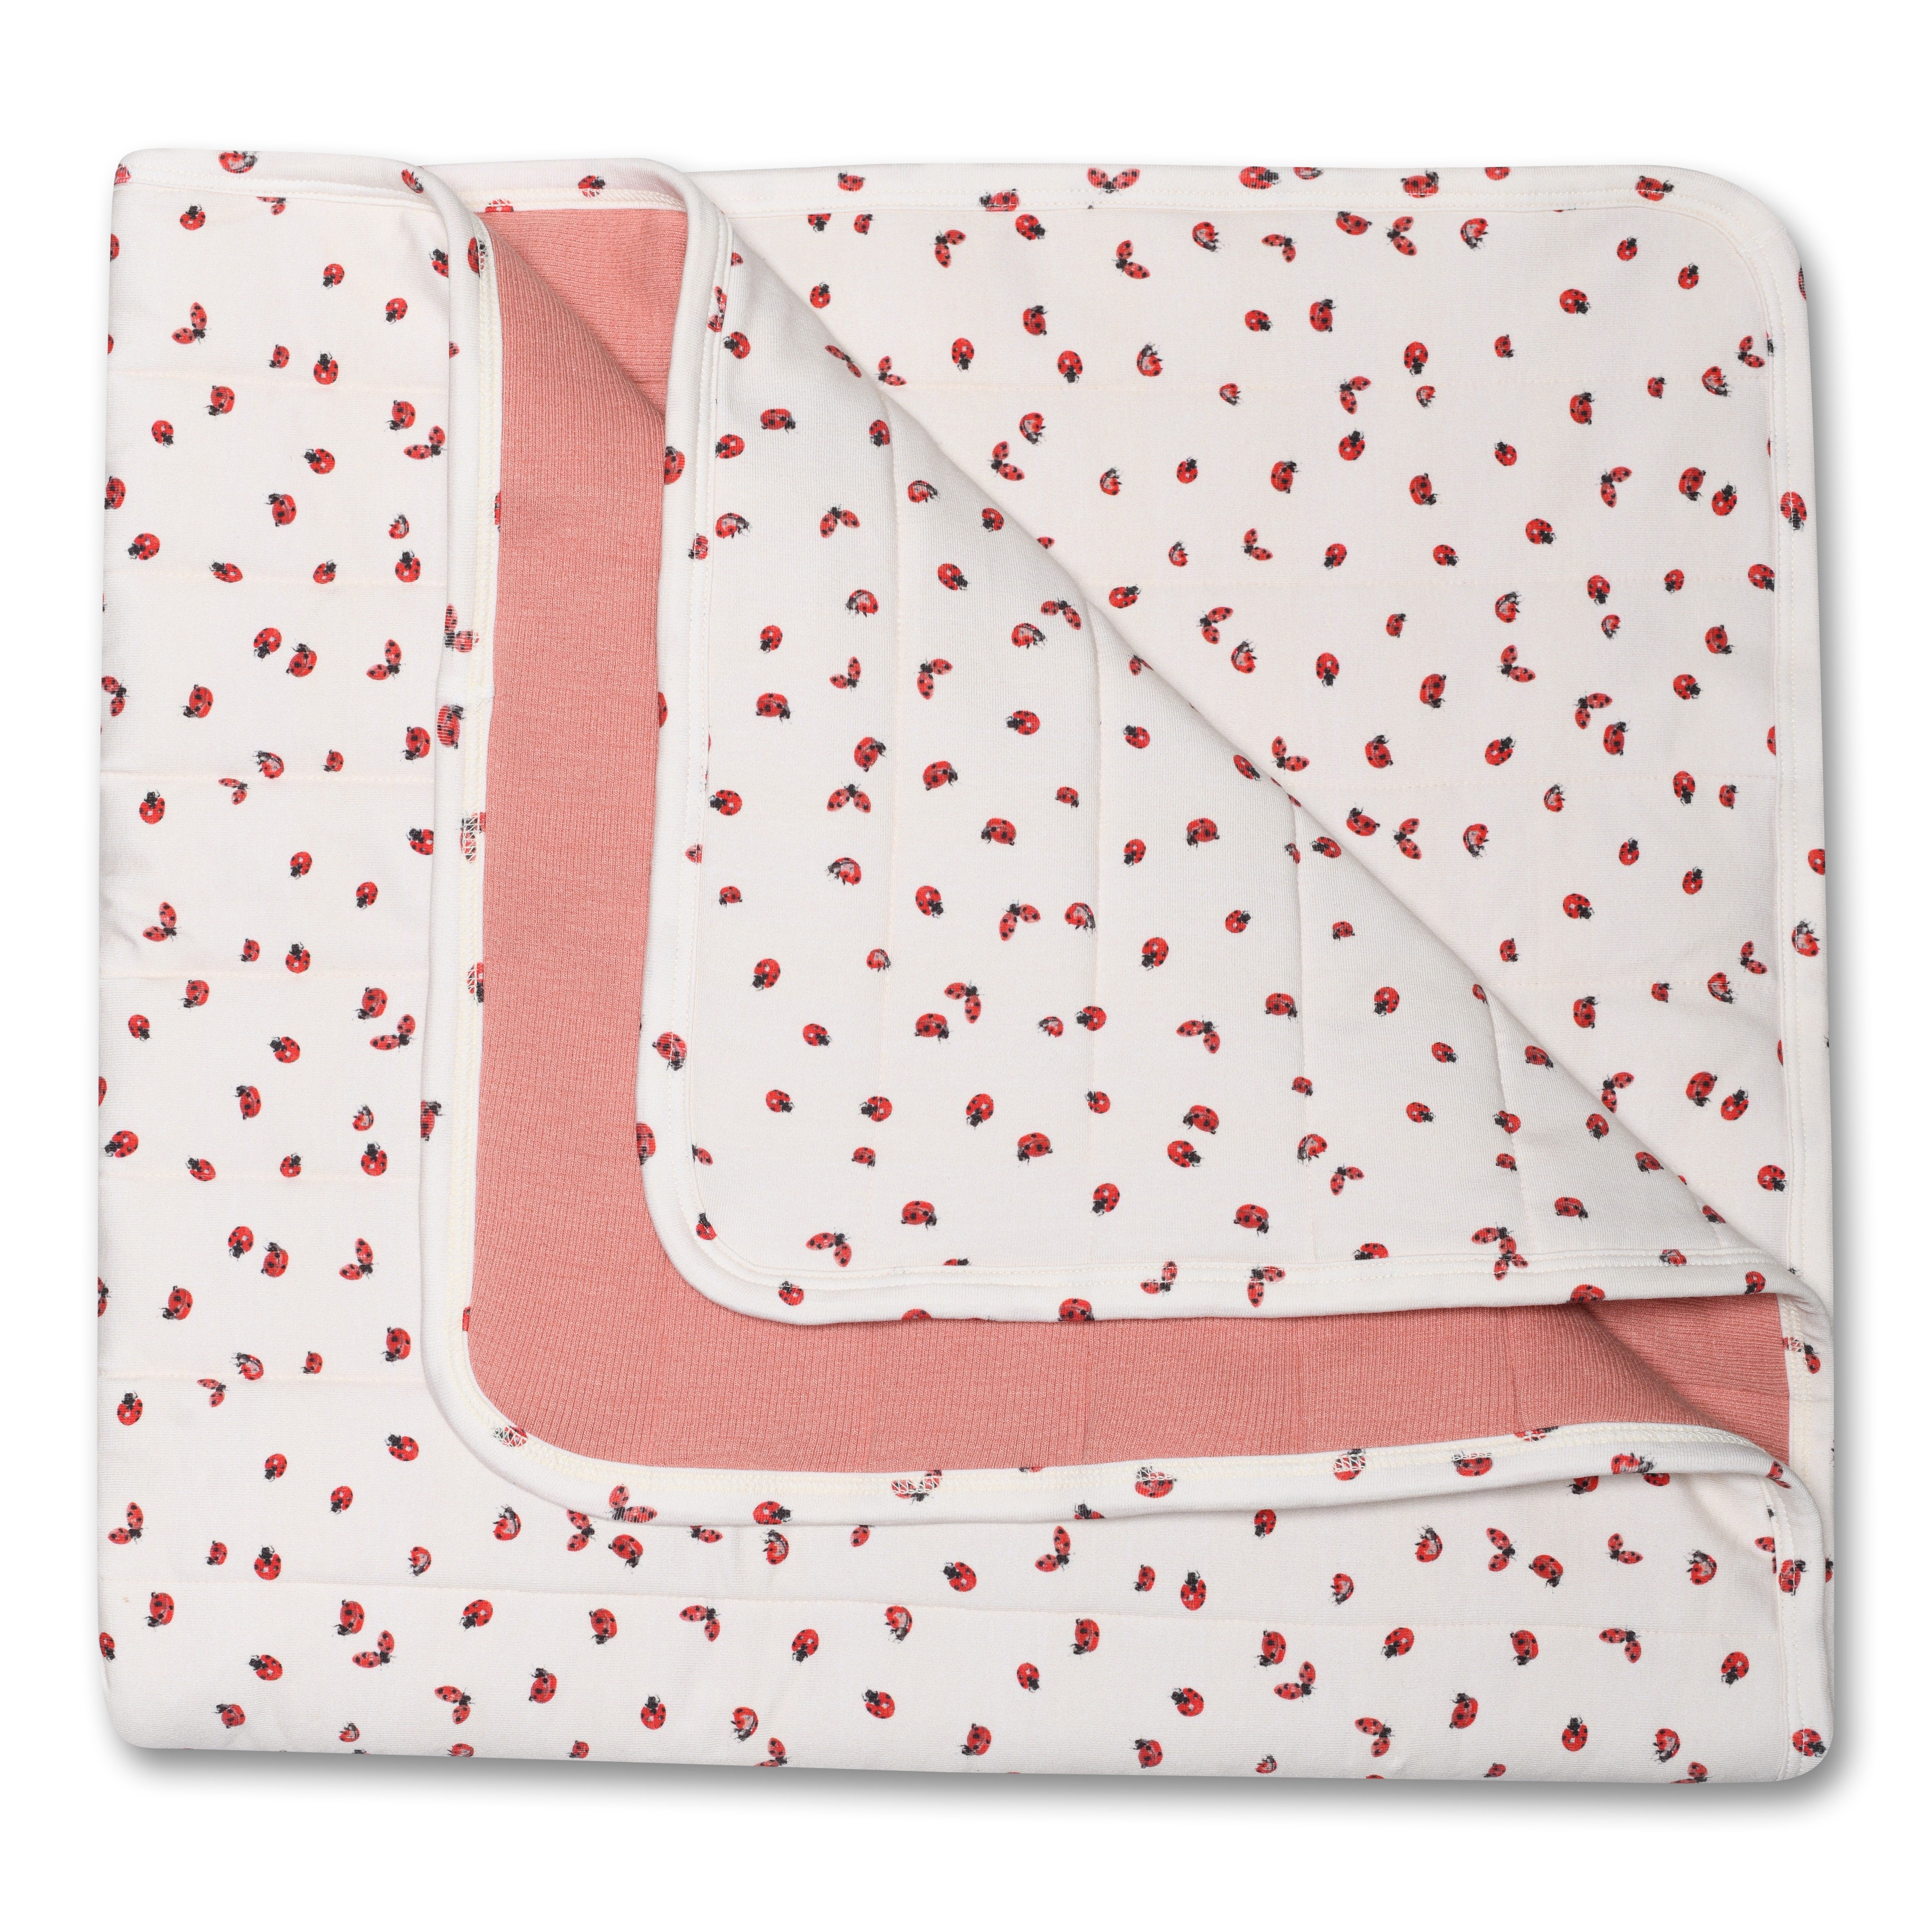 Petit Piao Quilted Plaid Printed - Ladybug